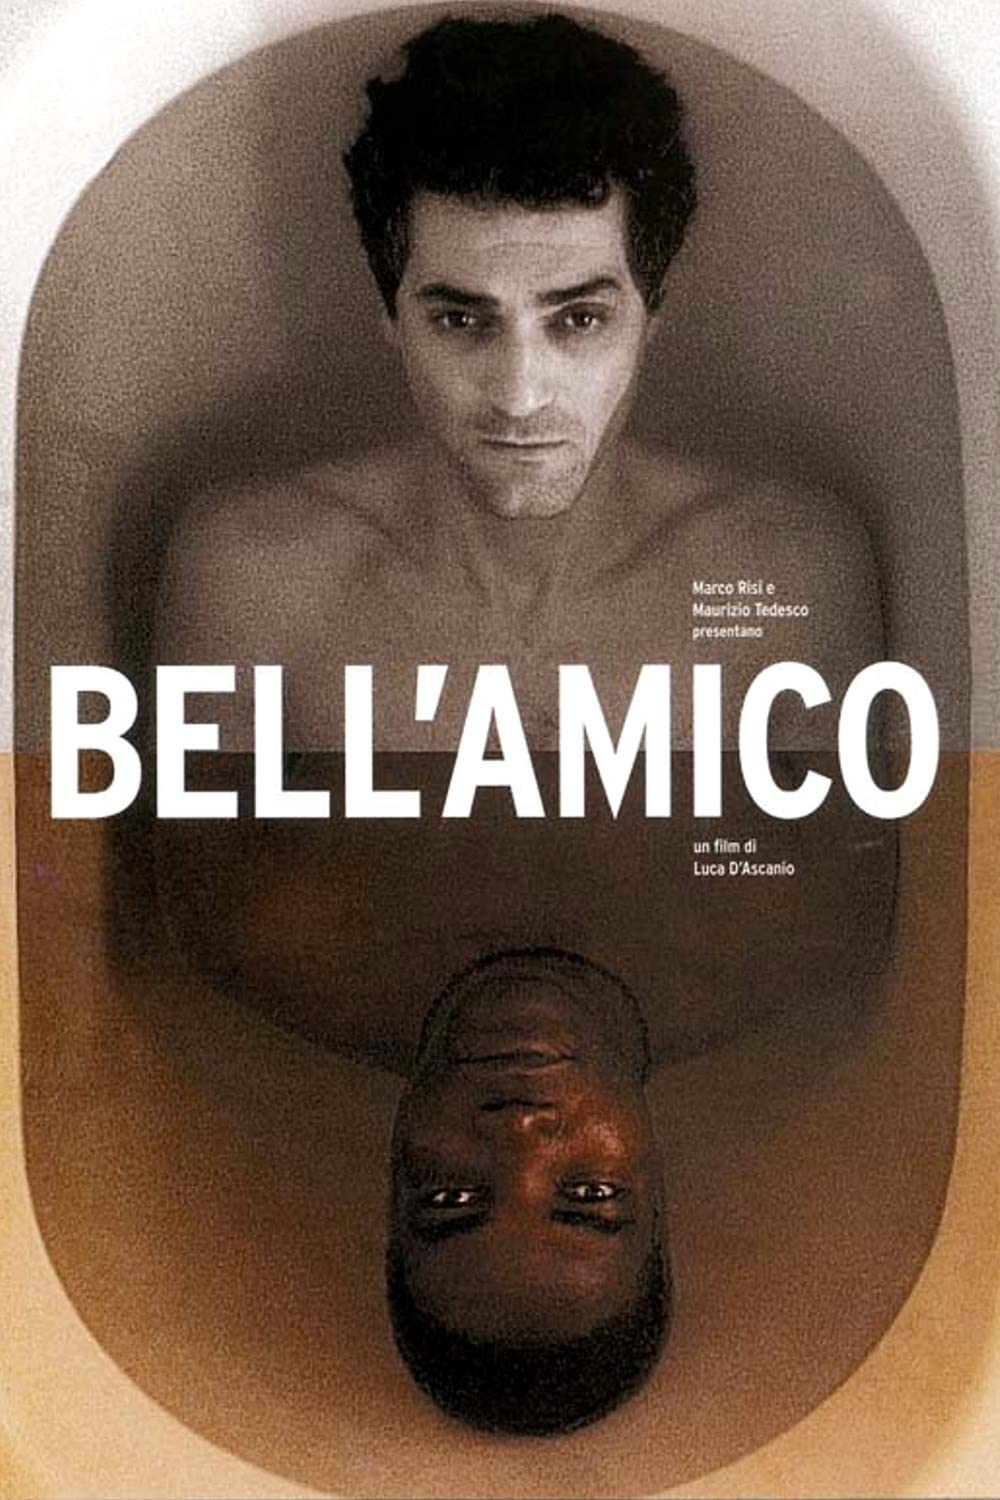 Bell’amico (2002)